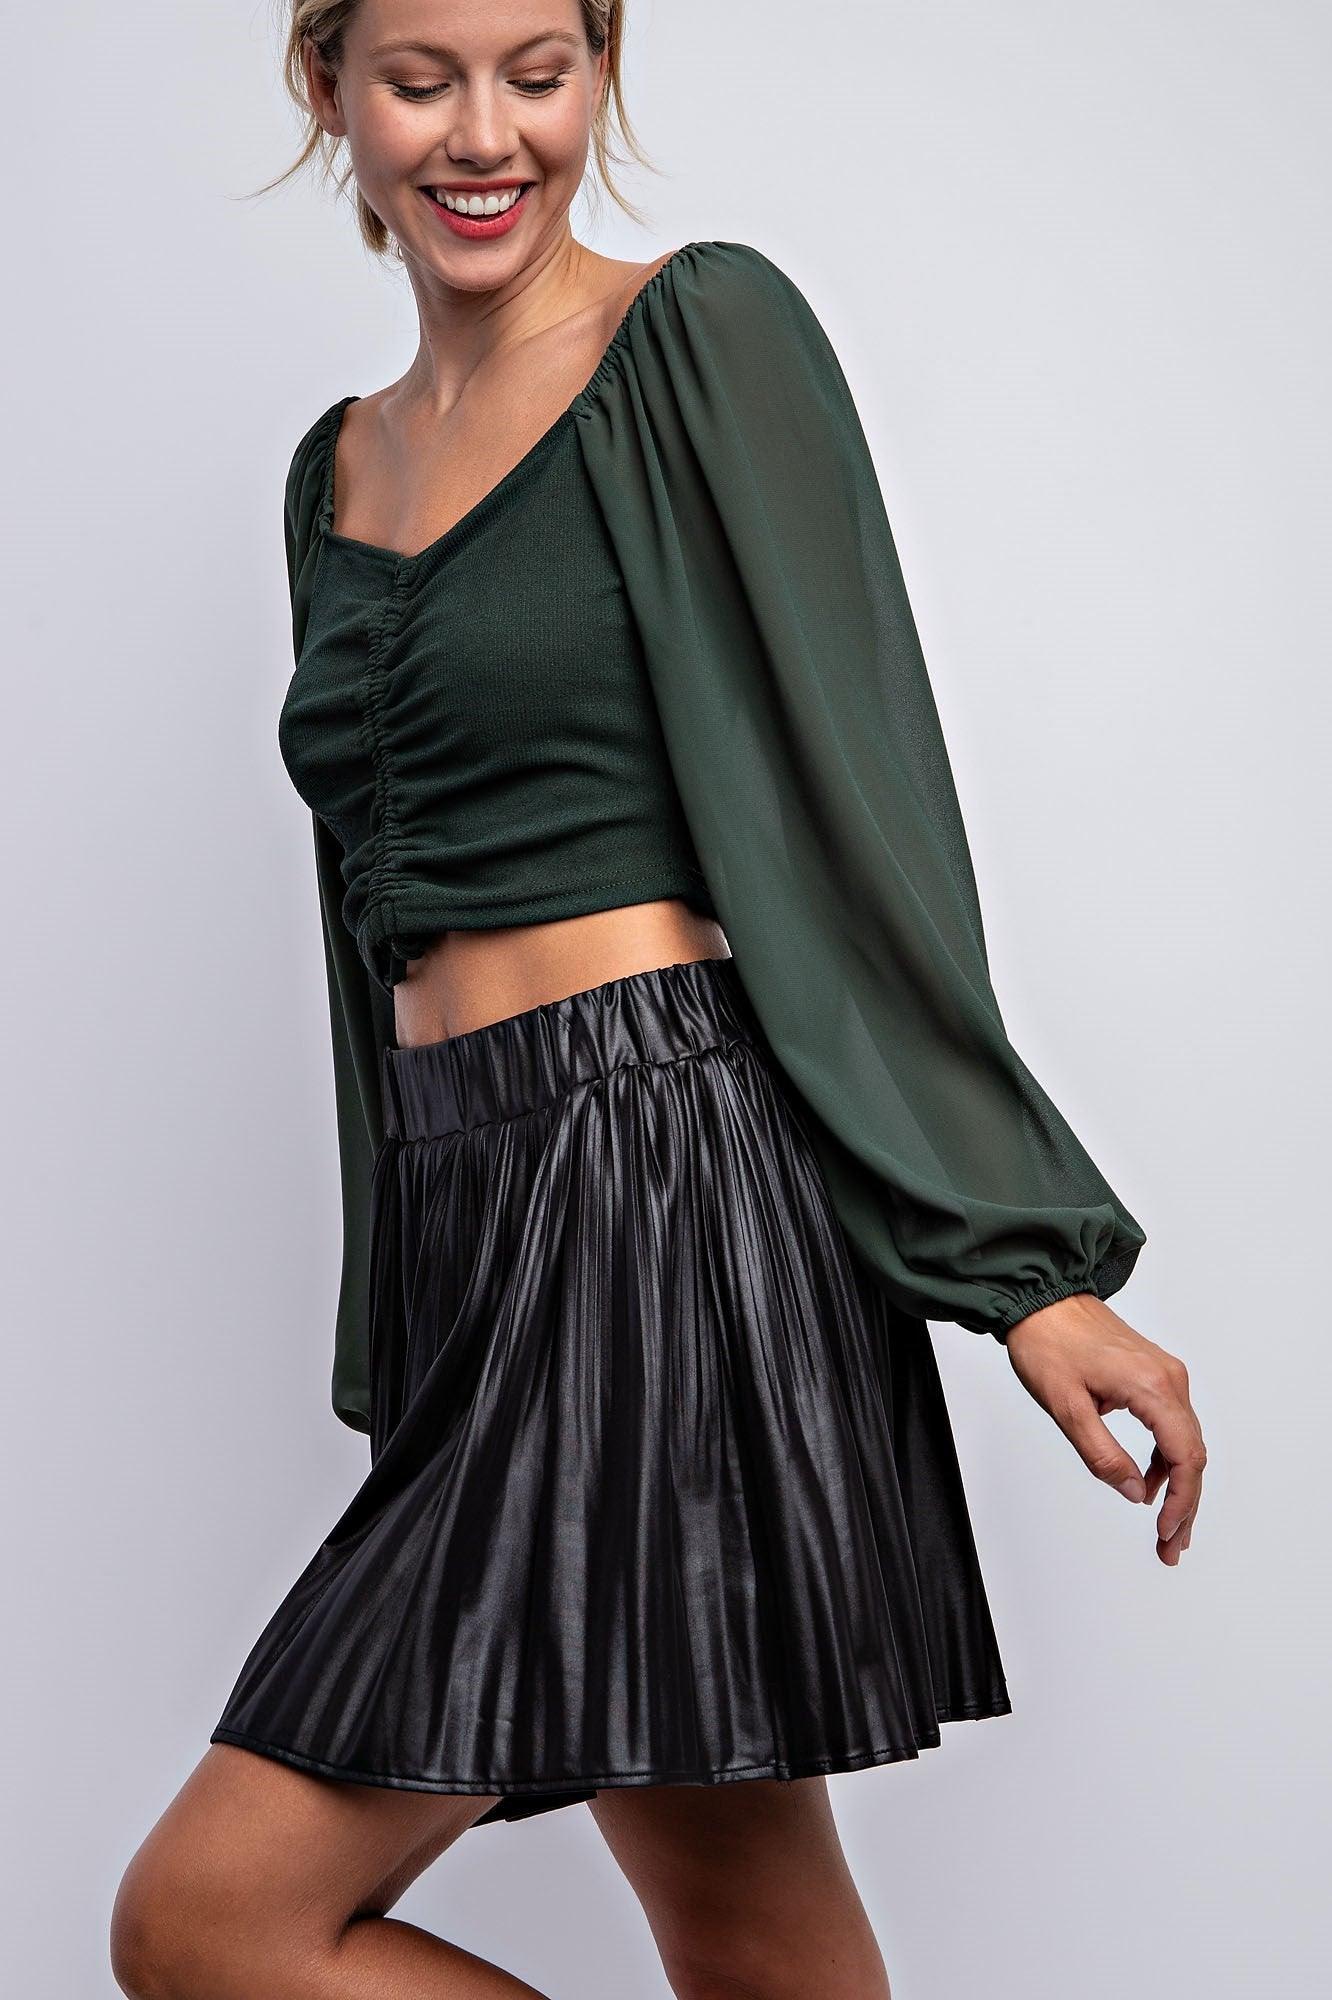 pleated faux leather mini skirt - RK Collections Boutique